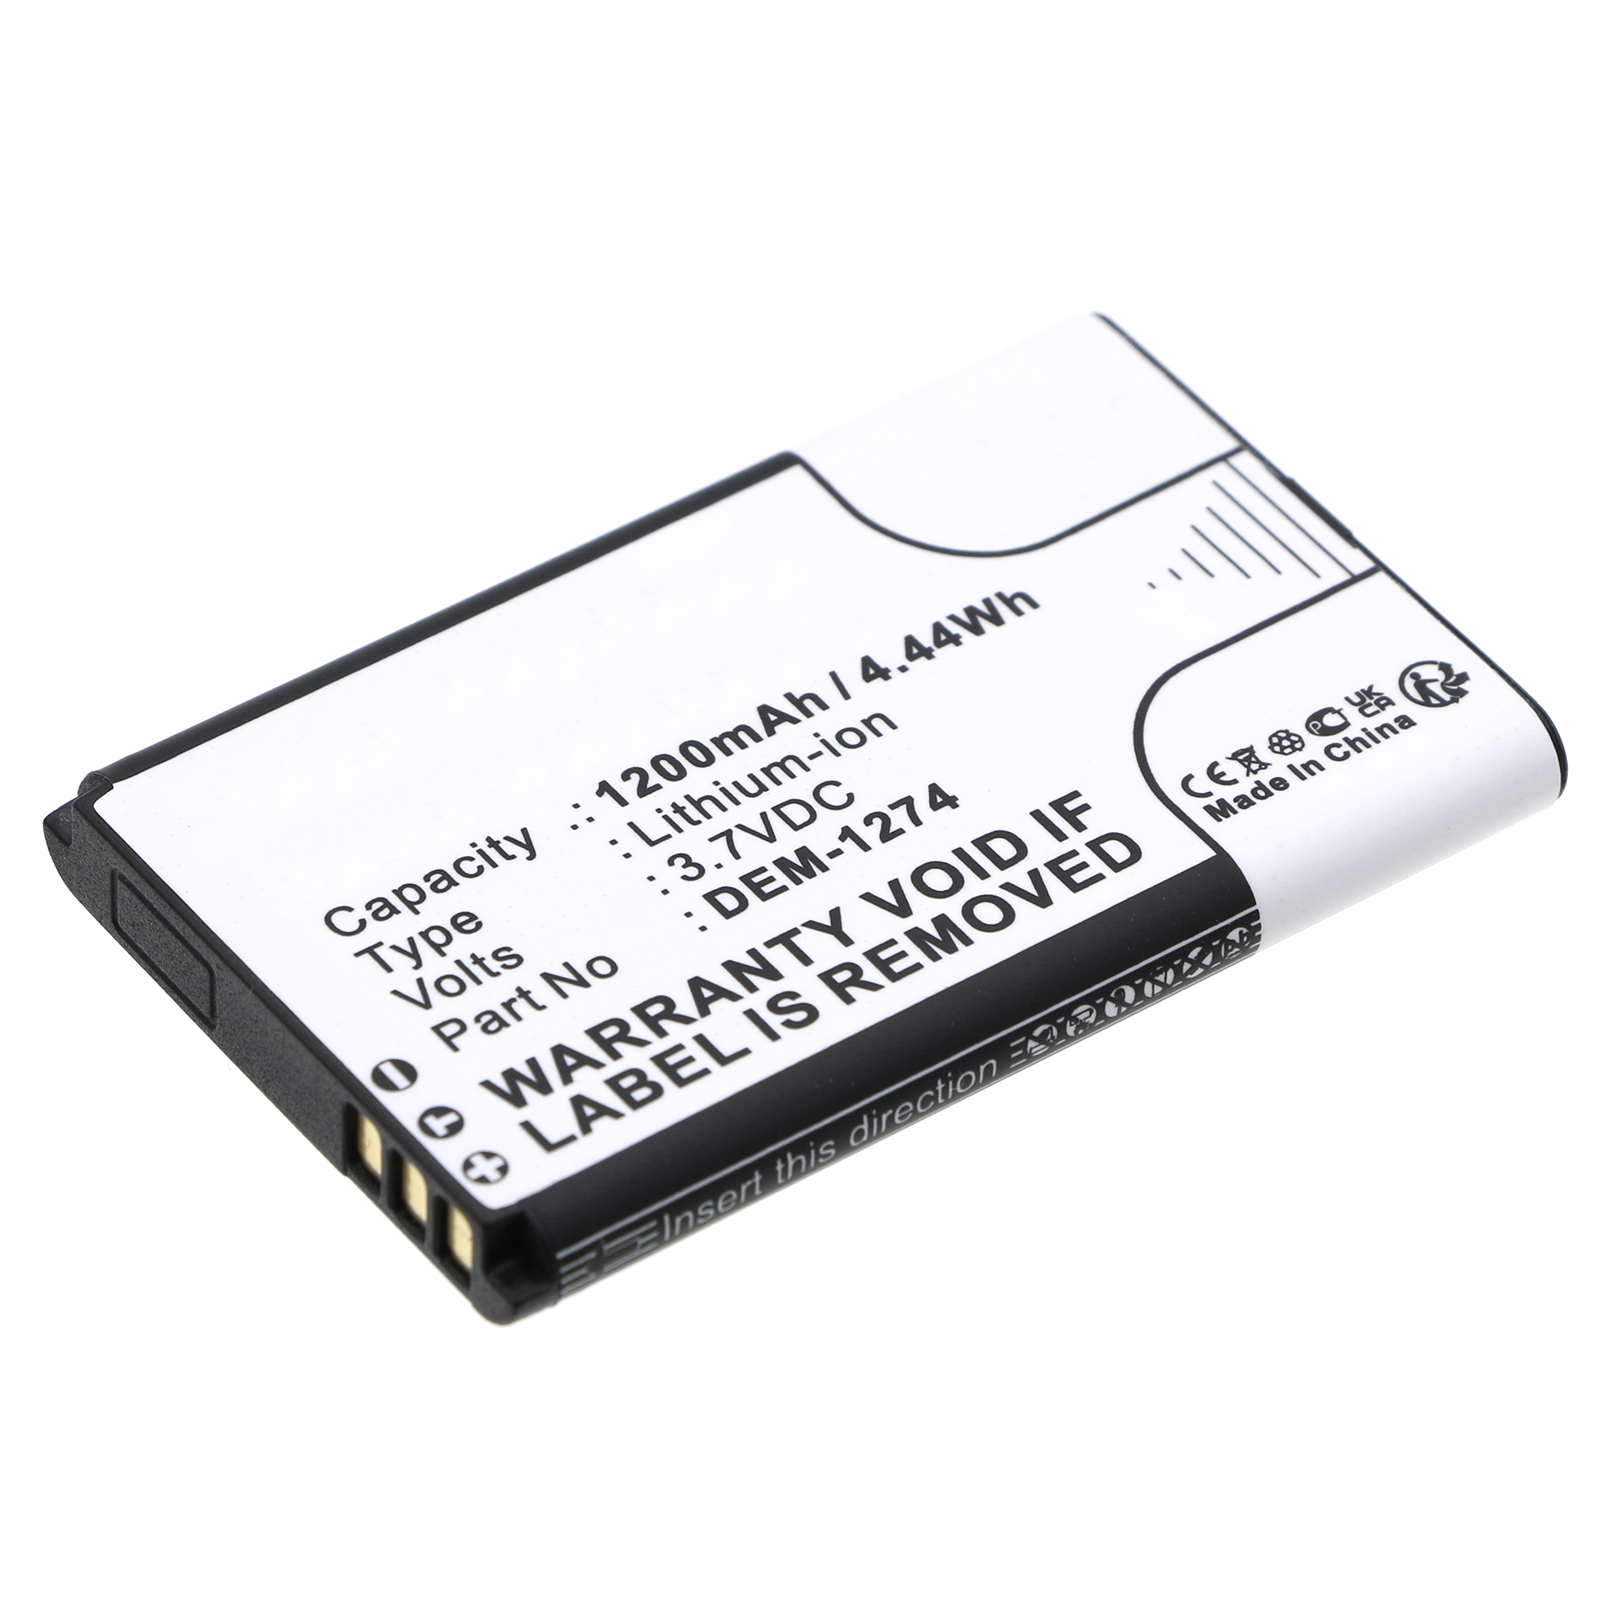 Synergy Digital Security and Safety Battery, Compatible with DEM DEM-1274 Security and Safety Battery (Li-ion, 3.7V, 1200mAh)